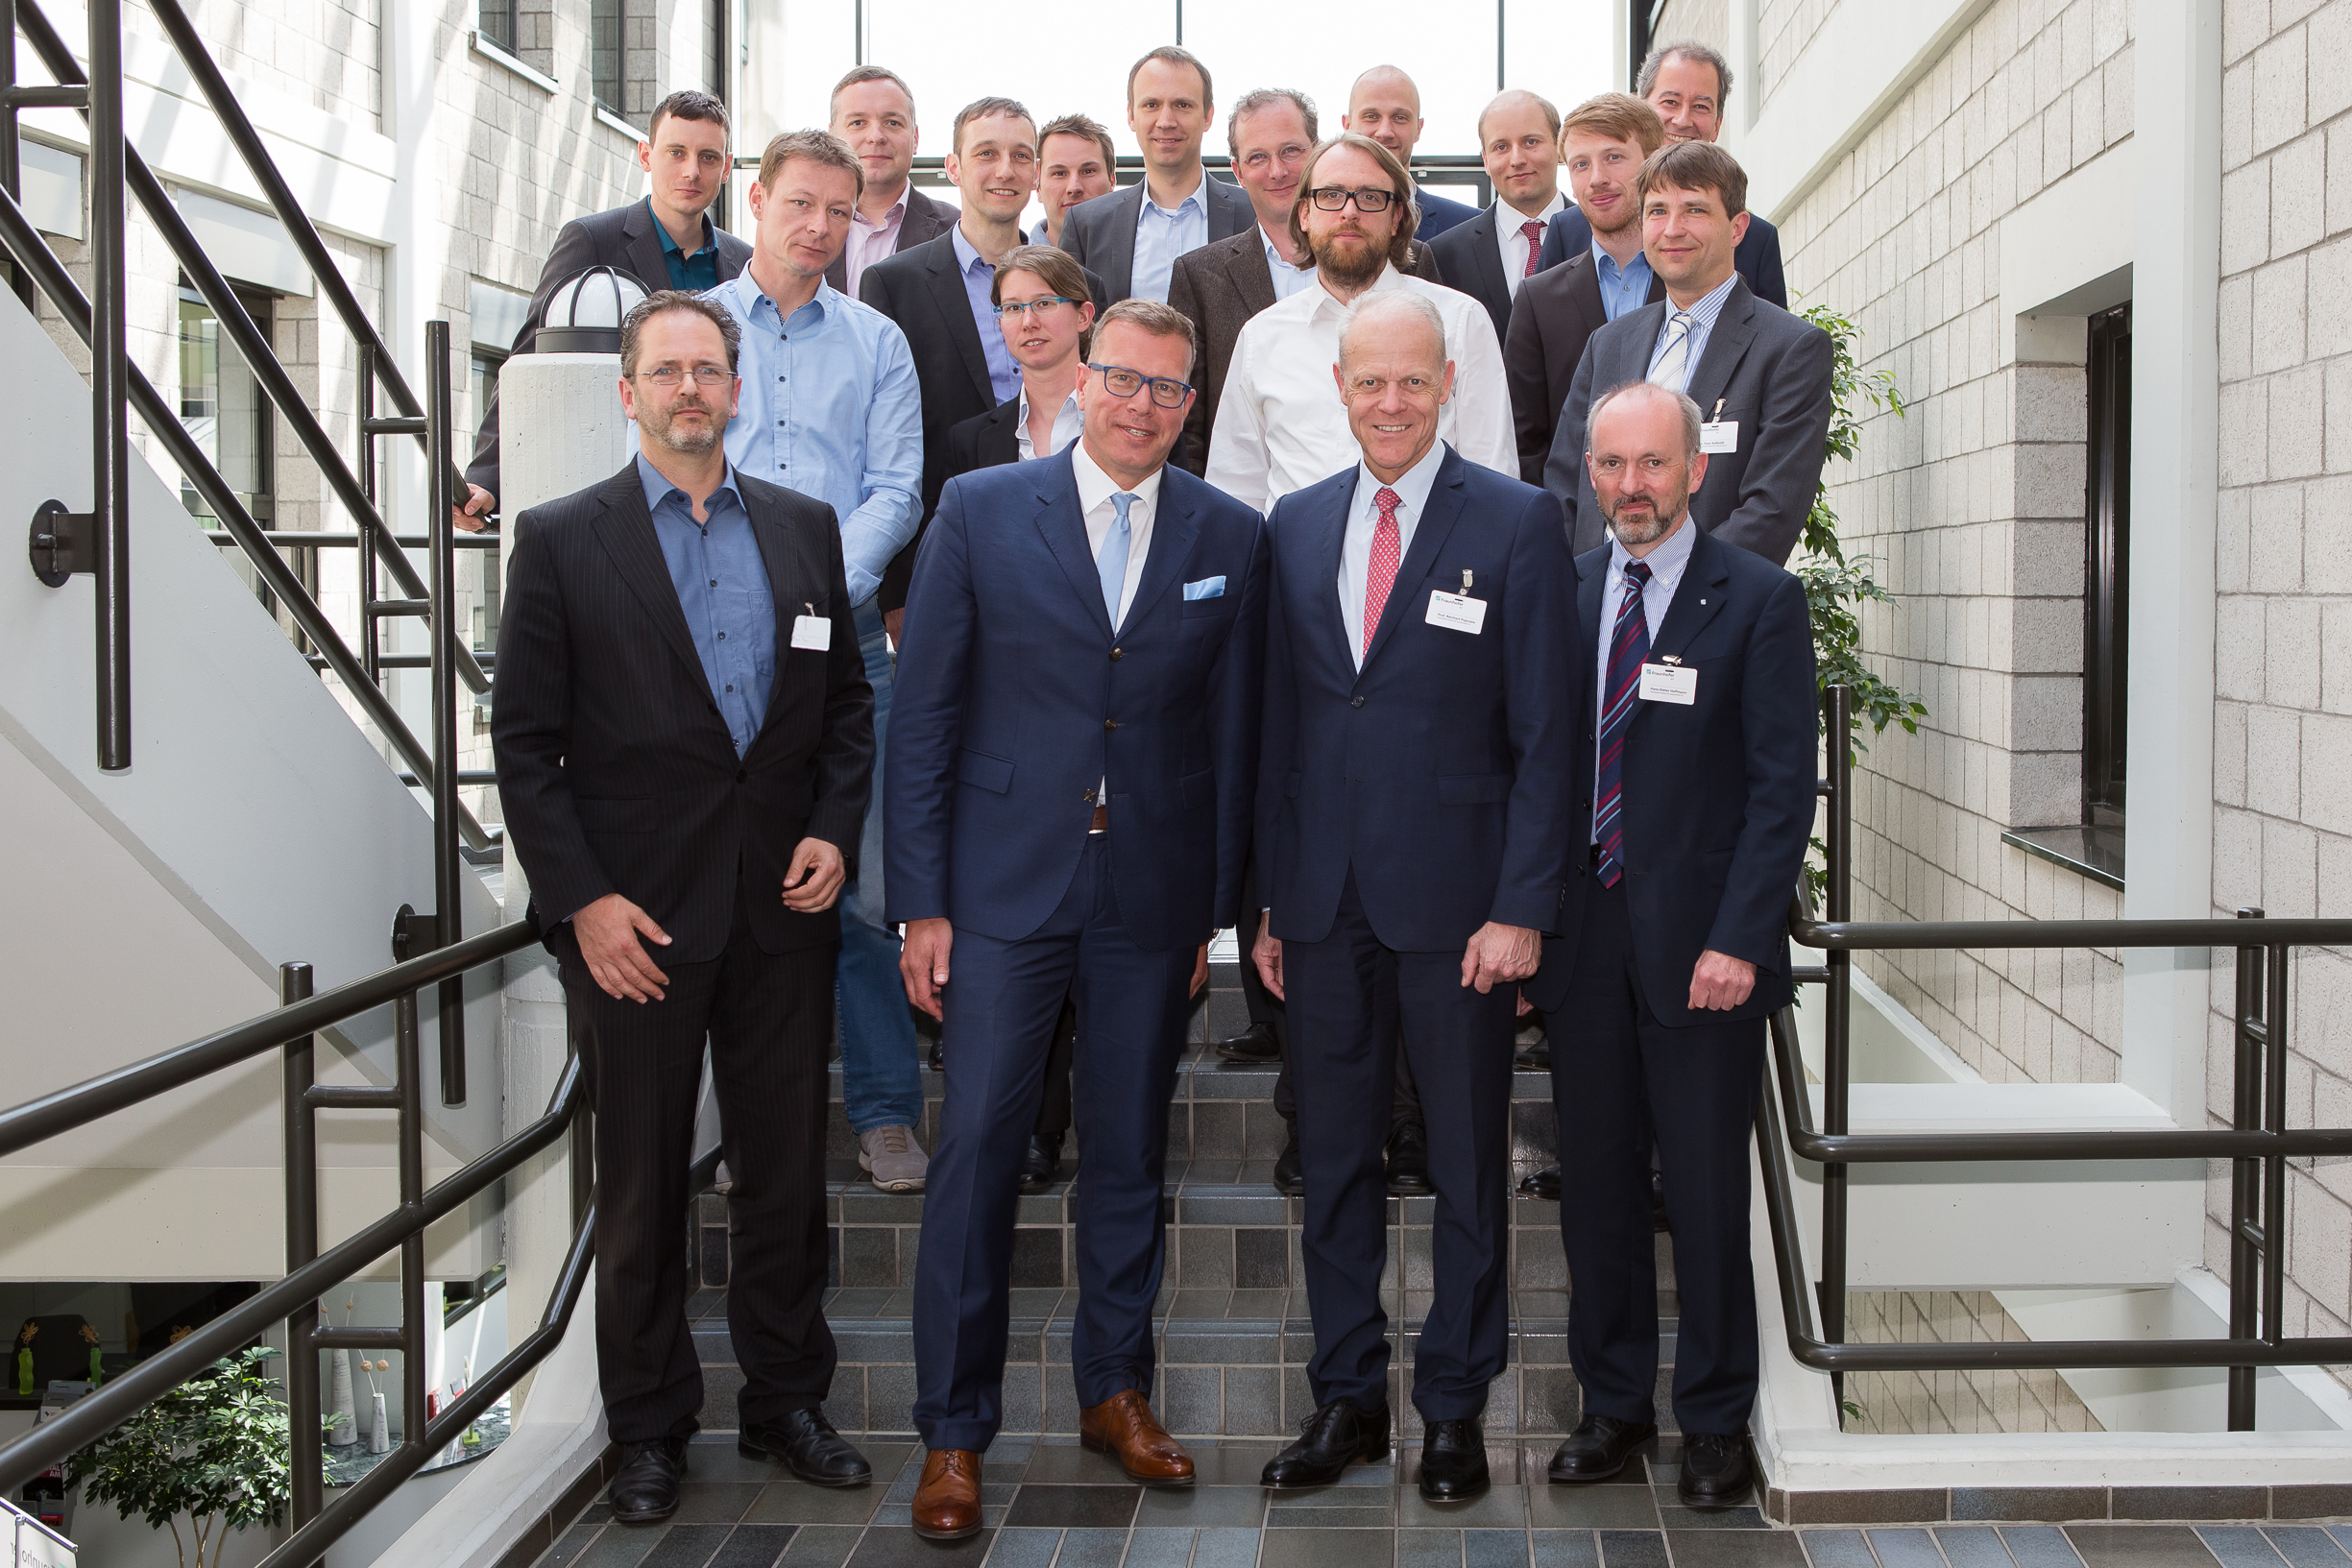 Partners of the Fraunhofer Cluster of Excellence “ADVANCED PHOTON SOURCES” met for the kick-off meeting on May 2, 2018 in Aachen. The coordinators: Cluster director Prof. Reinhart Poprawe, Fraunhofer ILT (front row, second from right), and Prof. Andreas Tünnermann, Fraunhofer IOF (front row, second from left).